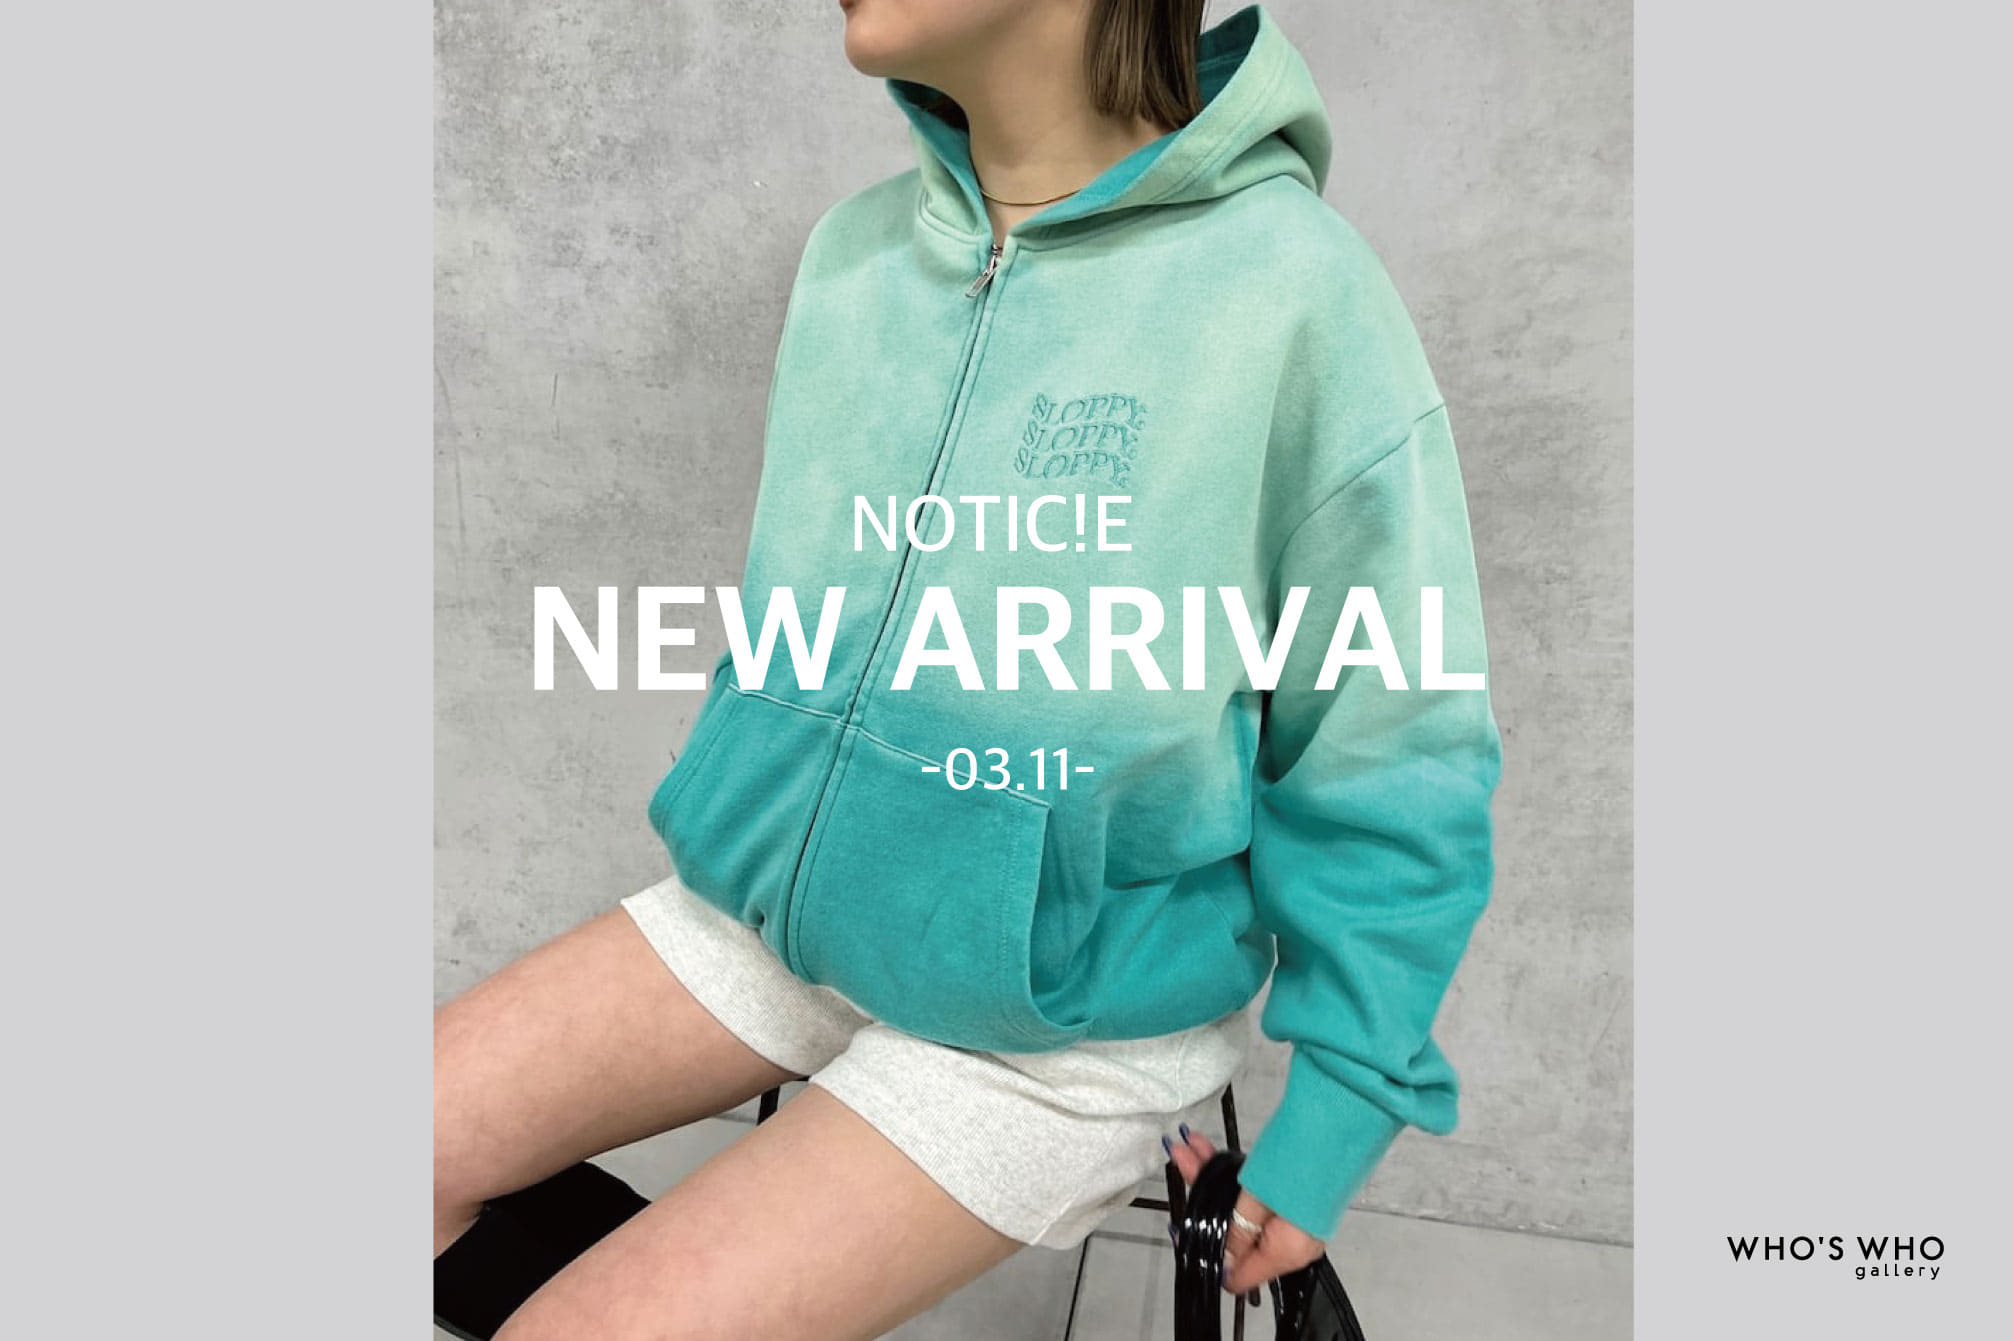 WHO’S WHO gallery 【NEW ARRIVAL NOTICE -03.11-】